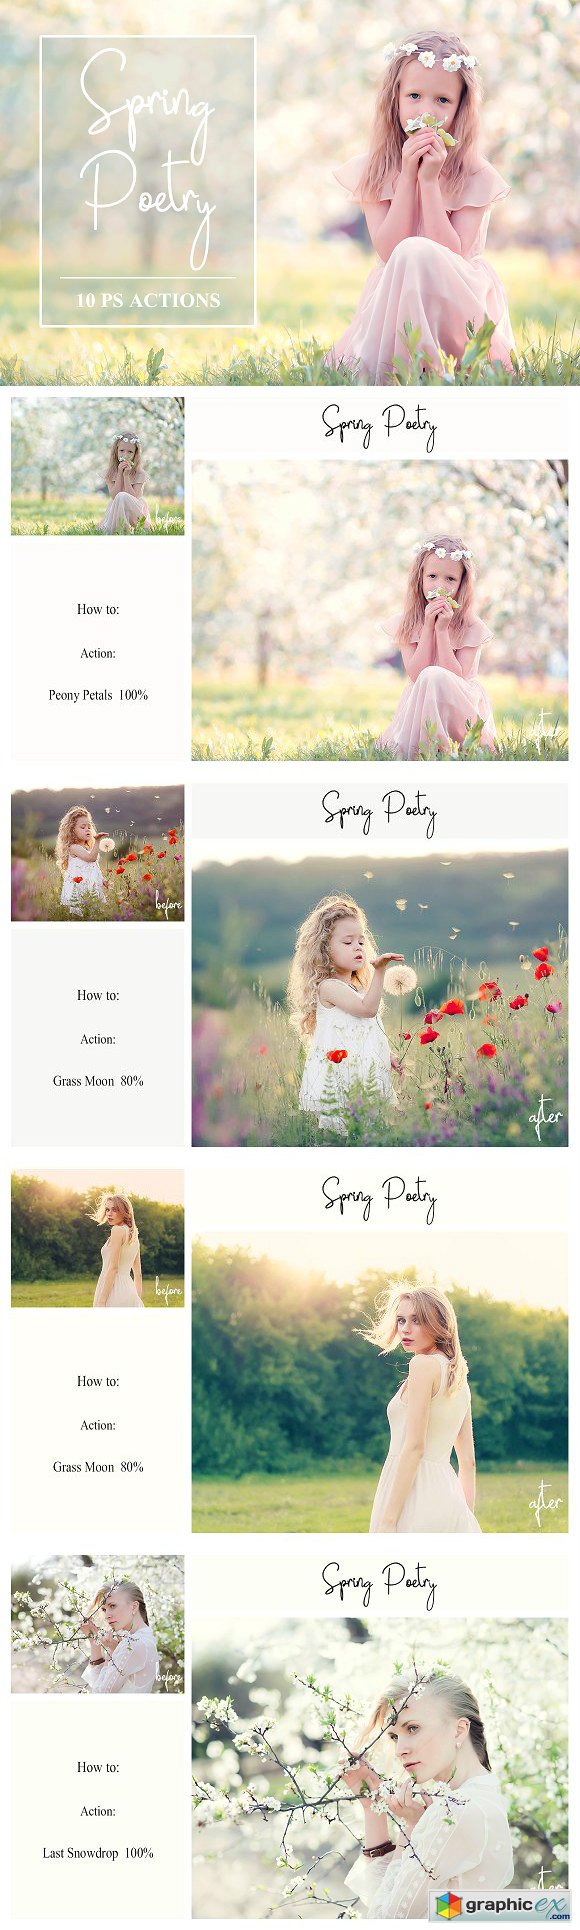 Spring Poetry - 10 PS Actions